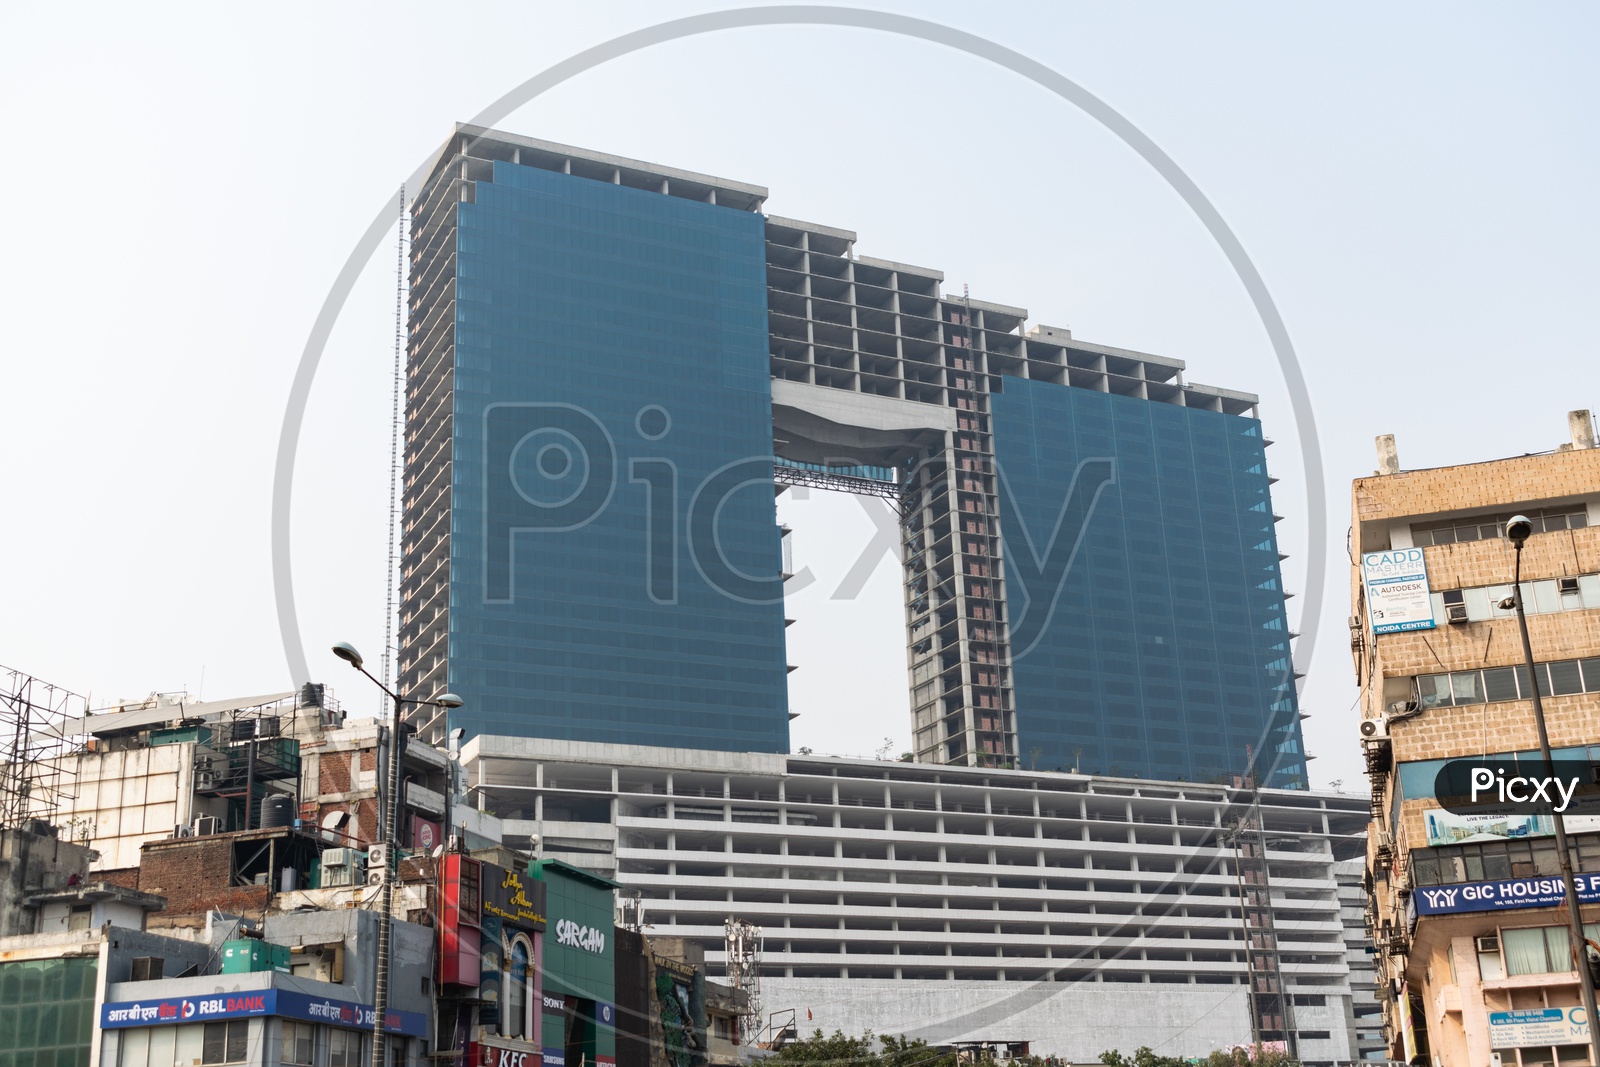 Wave one noida mall construction, other commercial building nearby